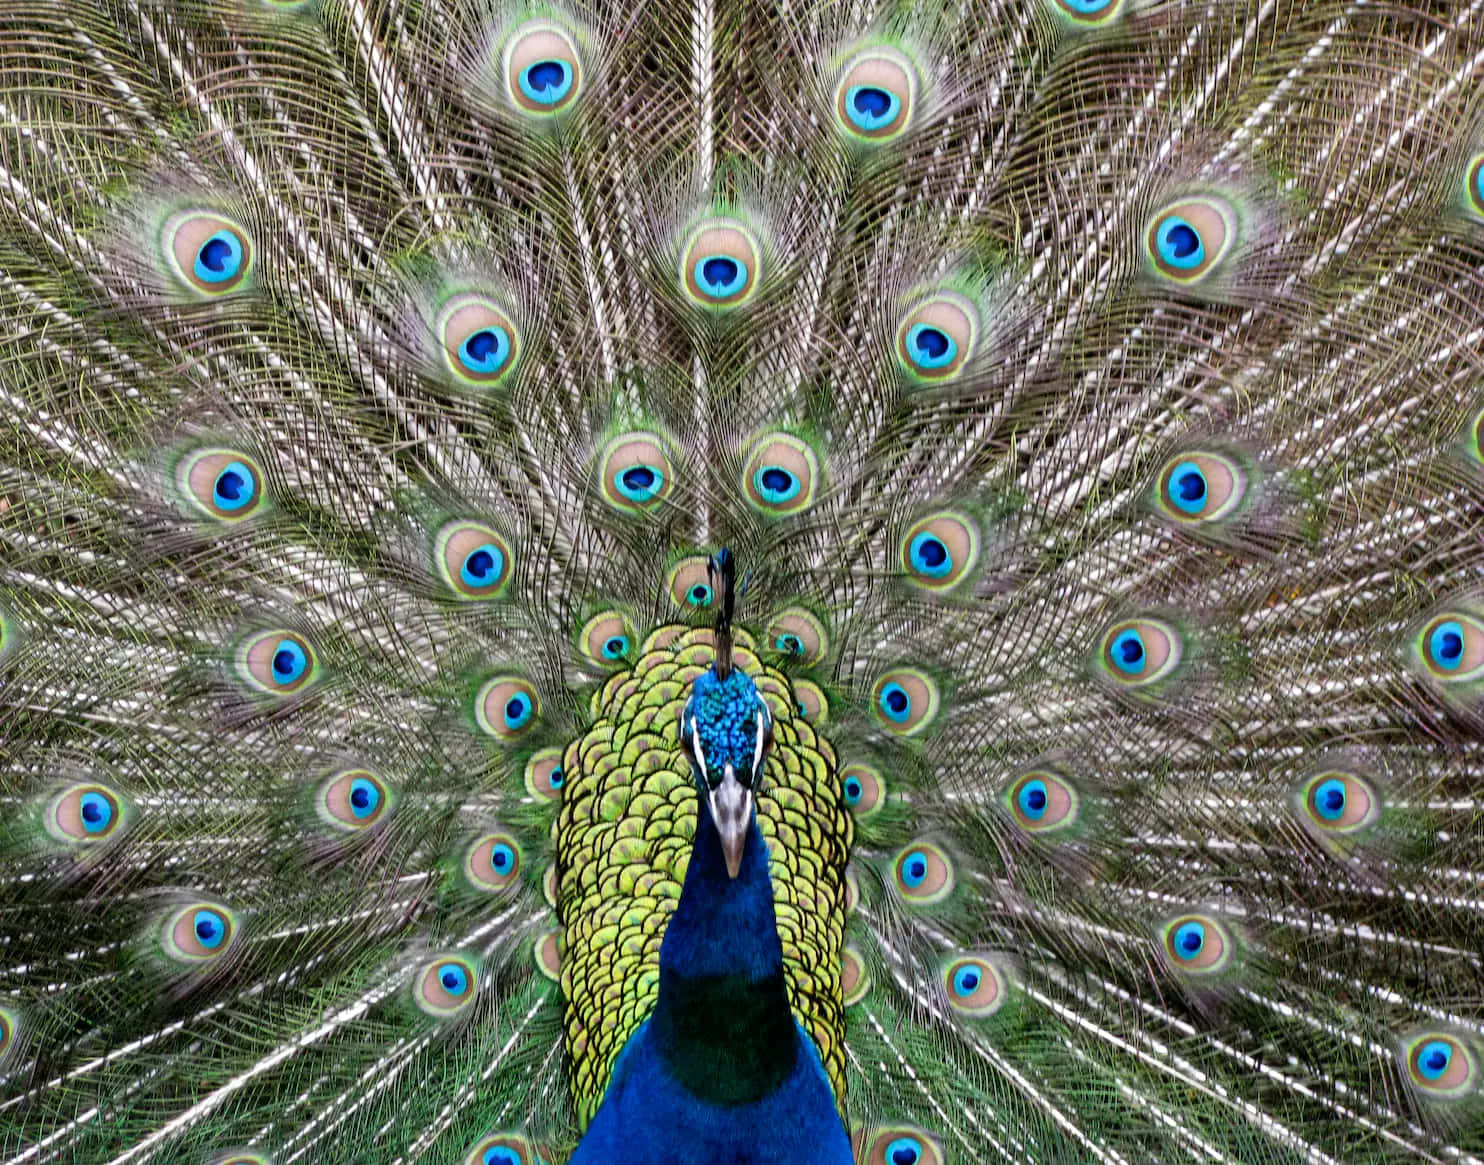 Dazzling Display Of A Majestic Peacock